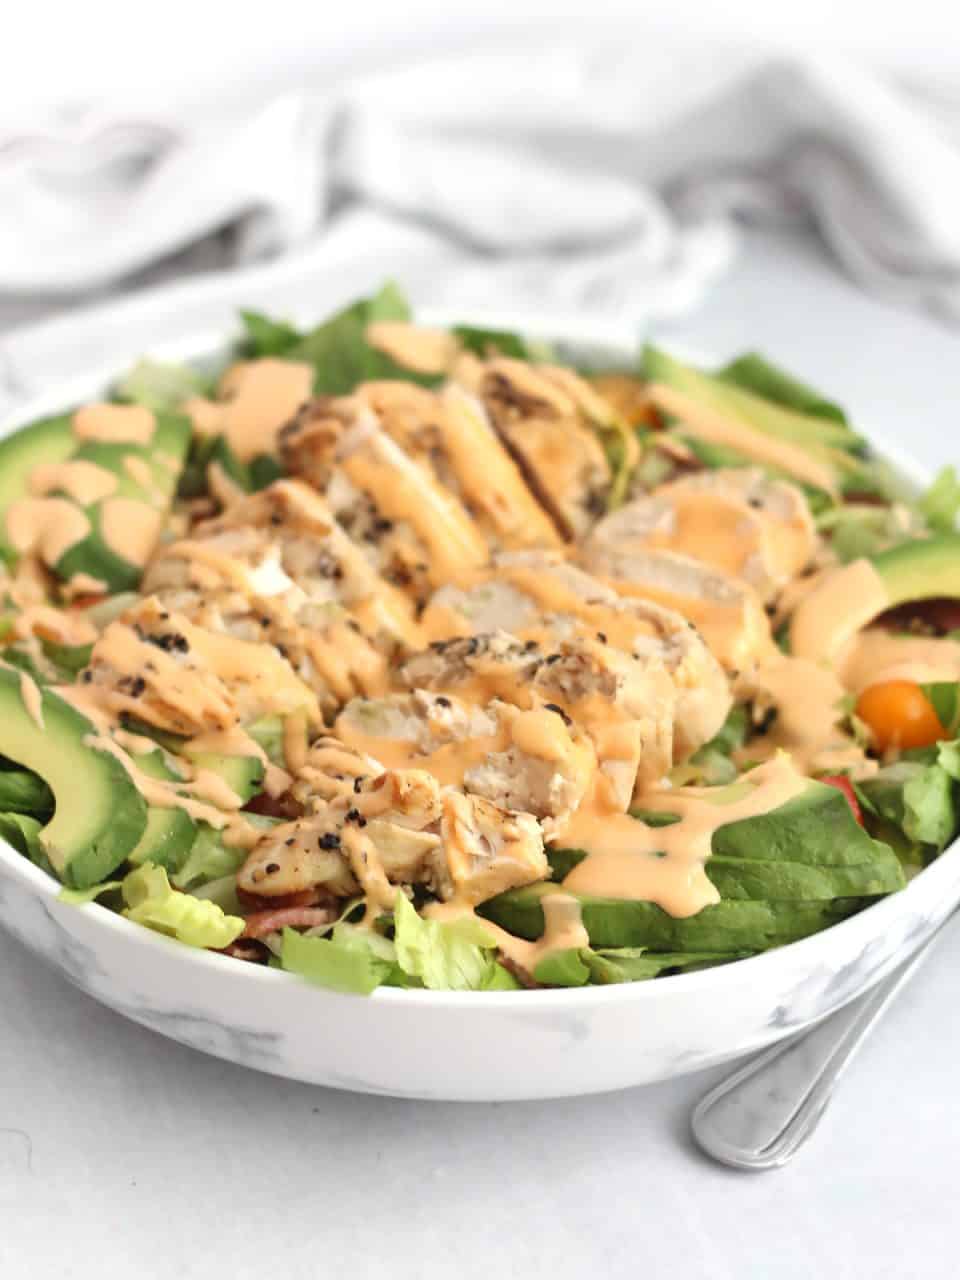 Sliced chicken breast drizzled with dressing on top of a bed of salad.